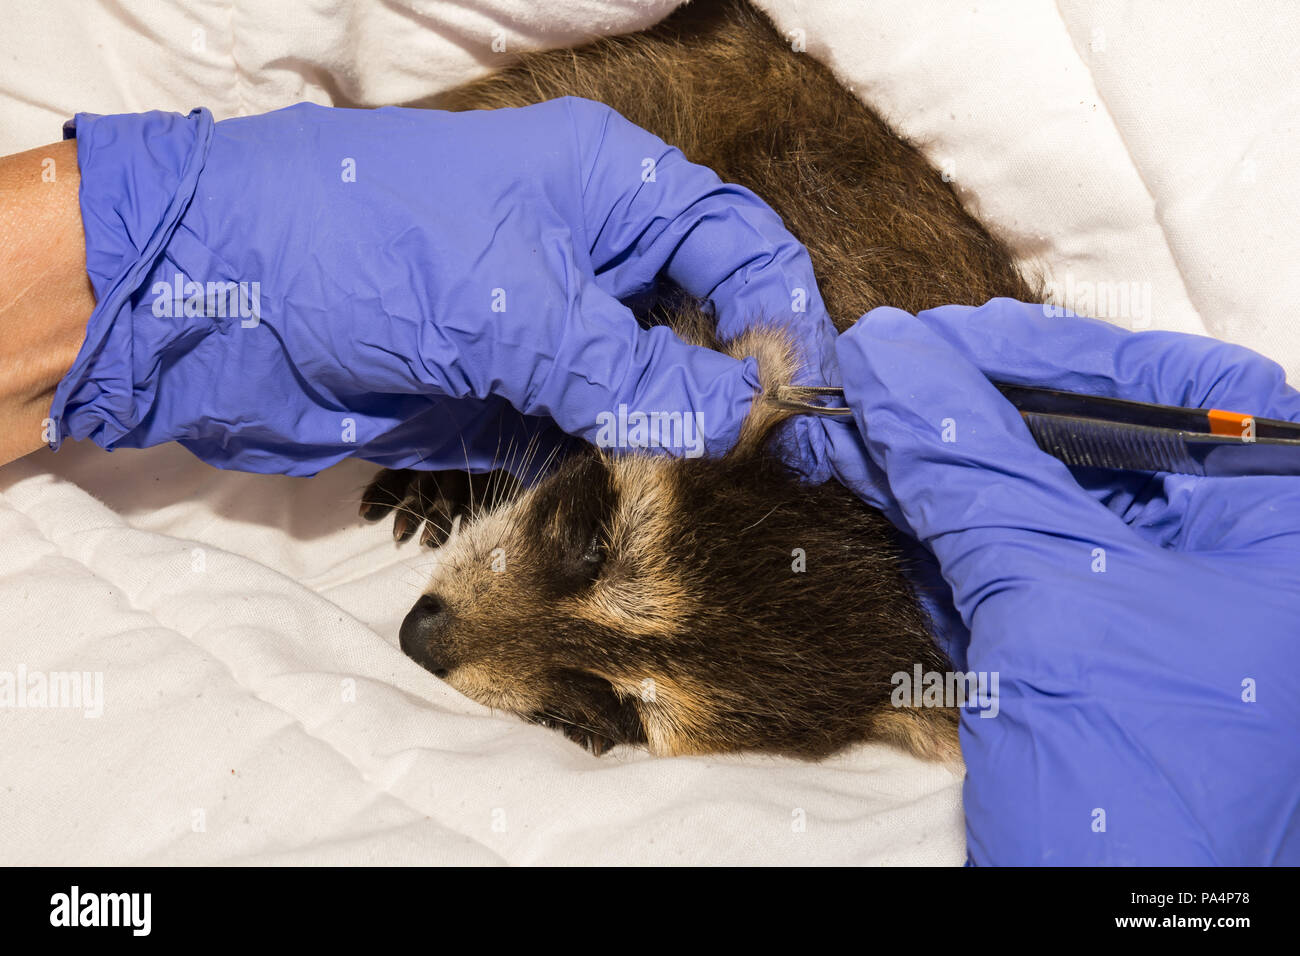 Removing ticks from a baby raccoon. Stock Photo